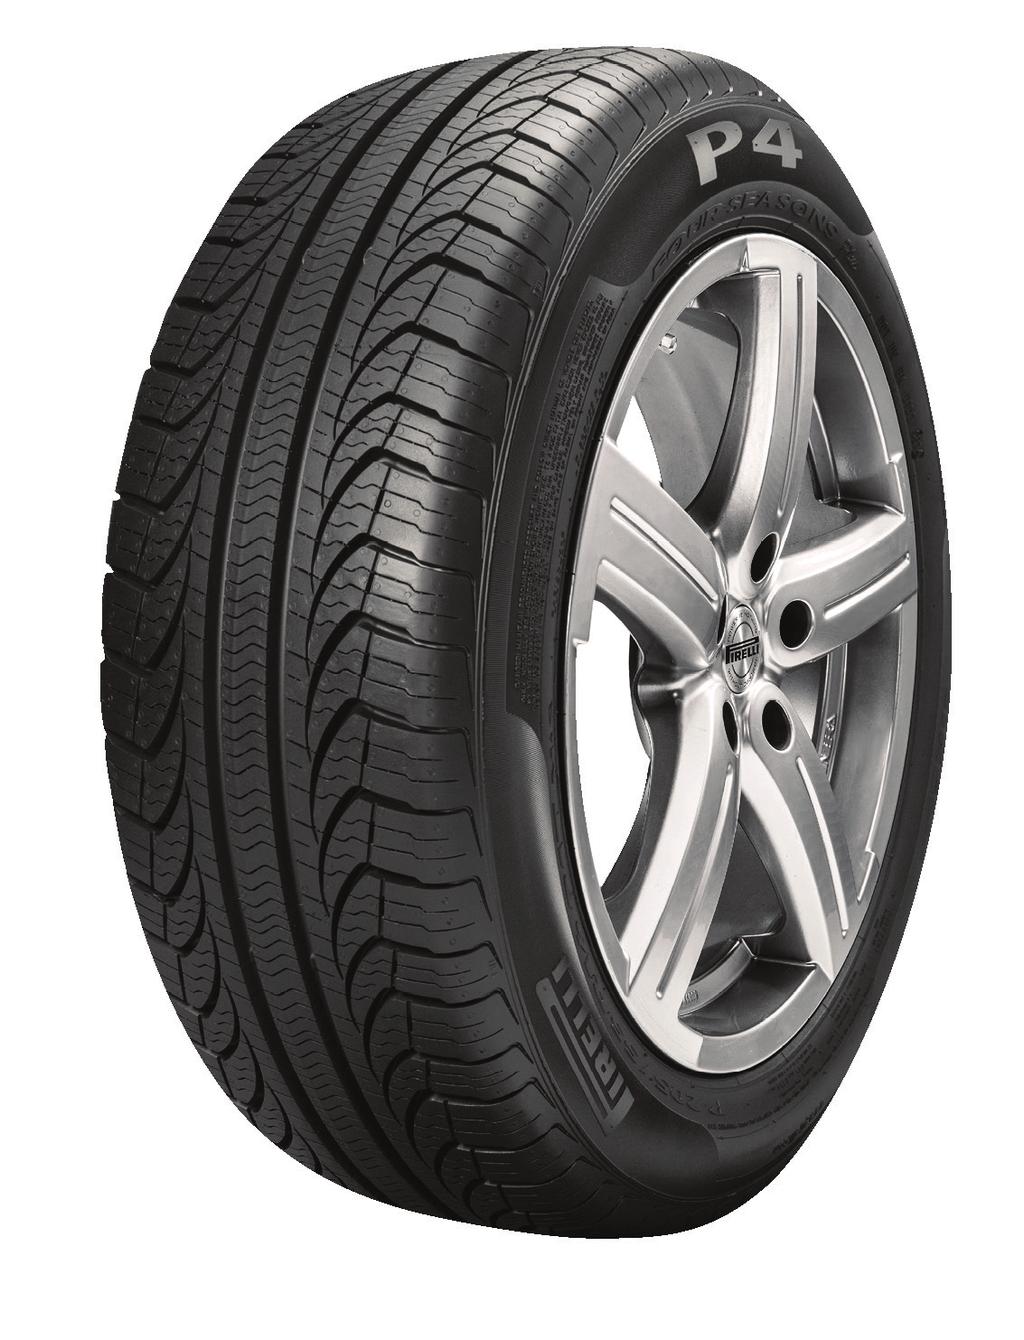 The Long Lasting, Fuel Efficient Tire with a Comfortable Ride Engineered to last longer than any other tire, the P4 Four Seasons Plus is backed by a 90,000 mile limited treadwear warranty *^.